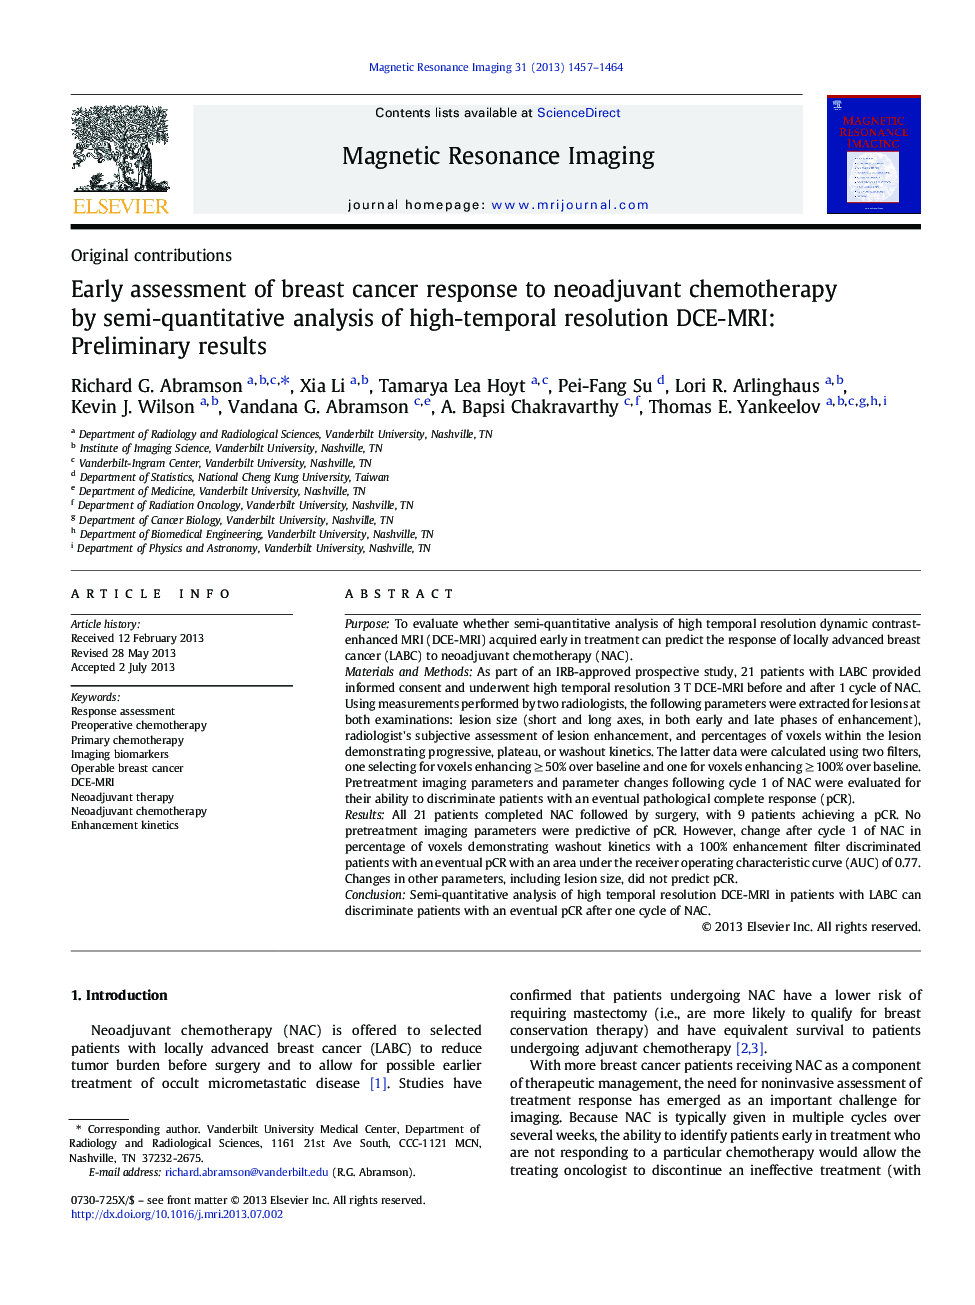 Early assessment of breast cancer response to neoadjuvant chemotherapy by semi-quantitative analysis of high-temporal resolution DCE-MRI: Preliminary results